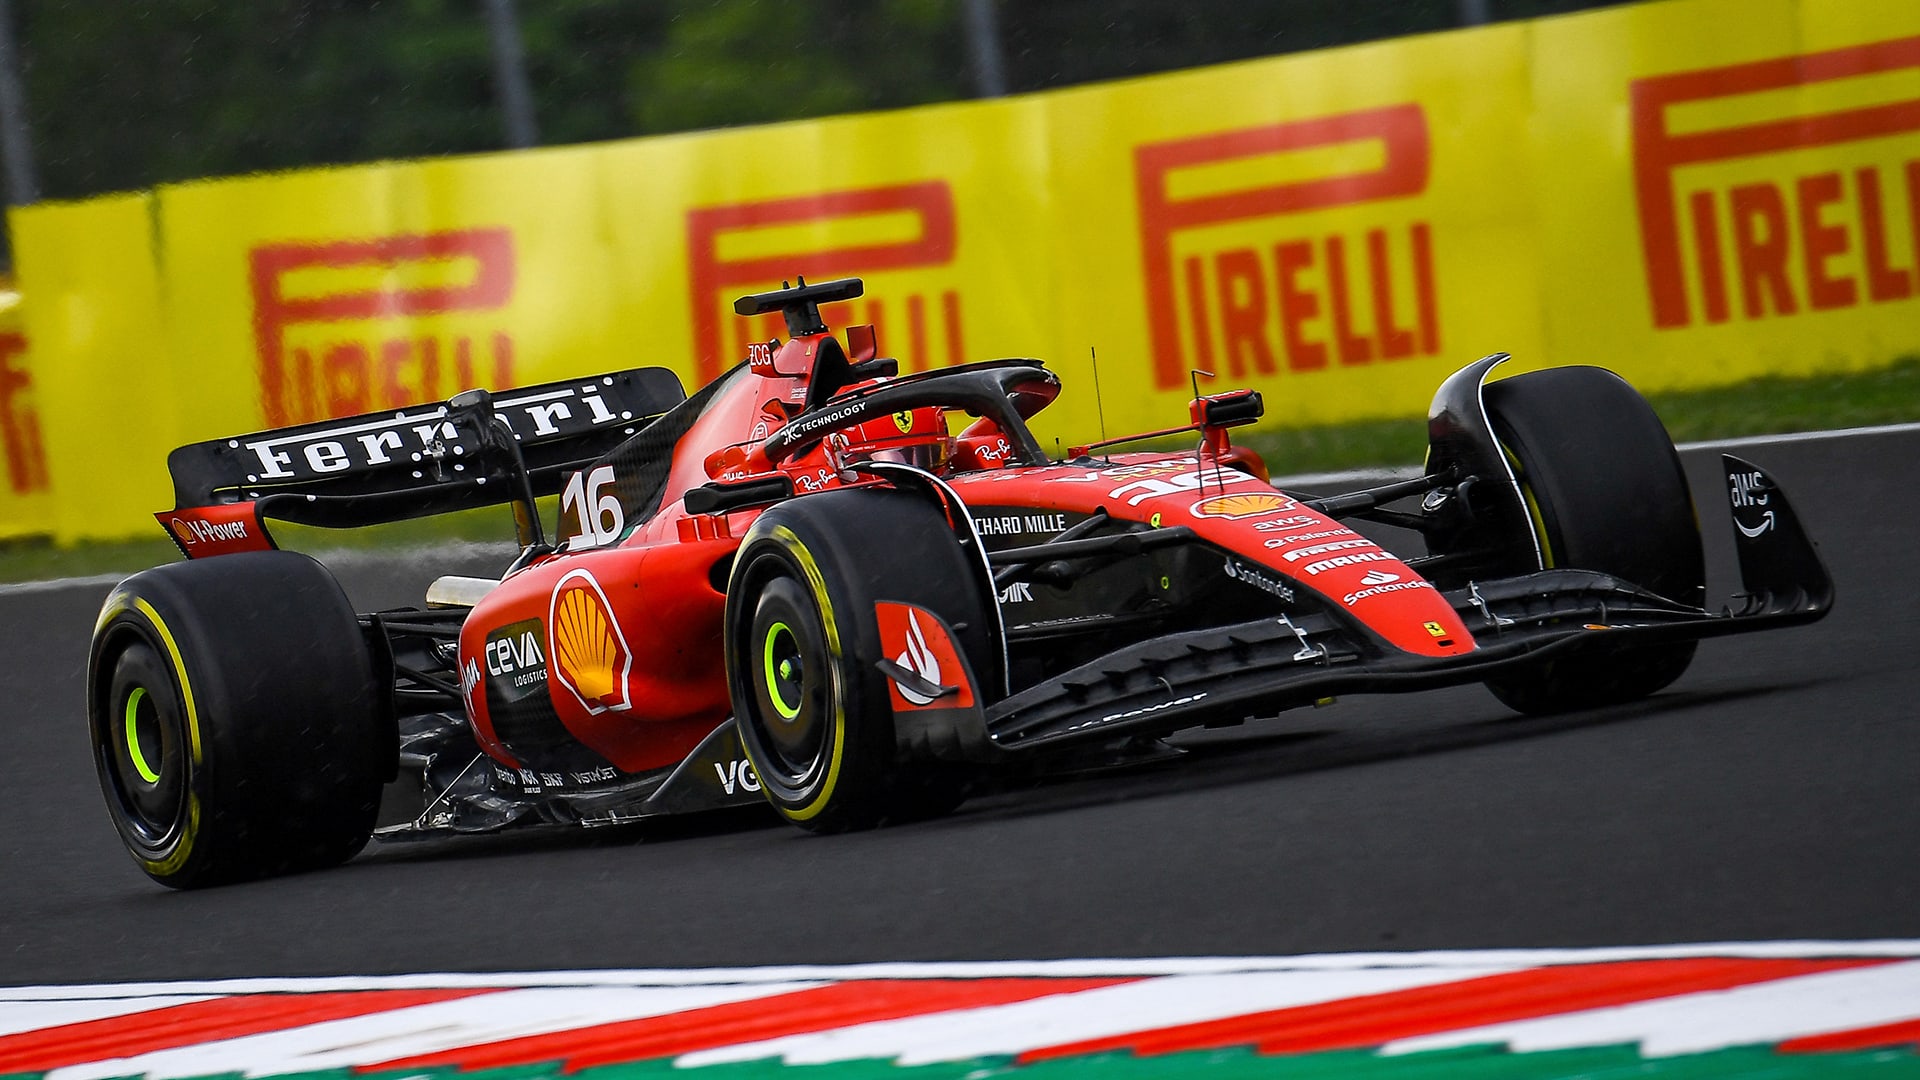 FP2 Leclerc narrowly leads Norris and Gasly during mixed up second practice session in Budapest Formula 1®